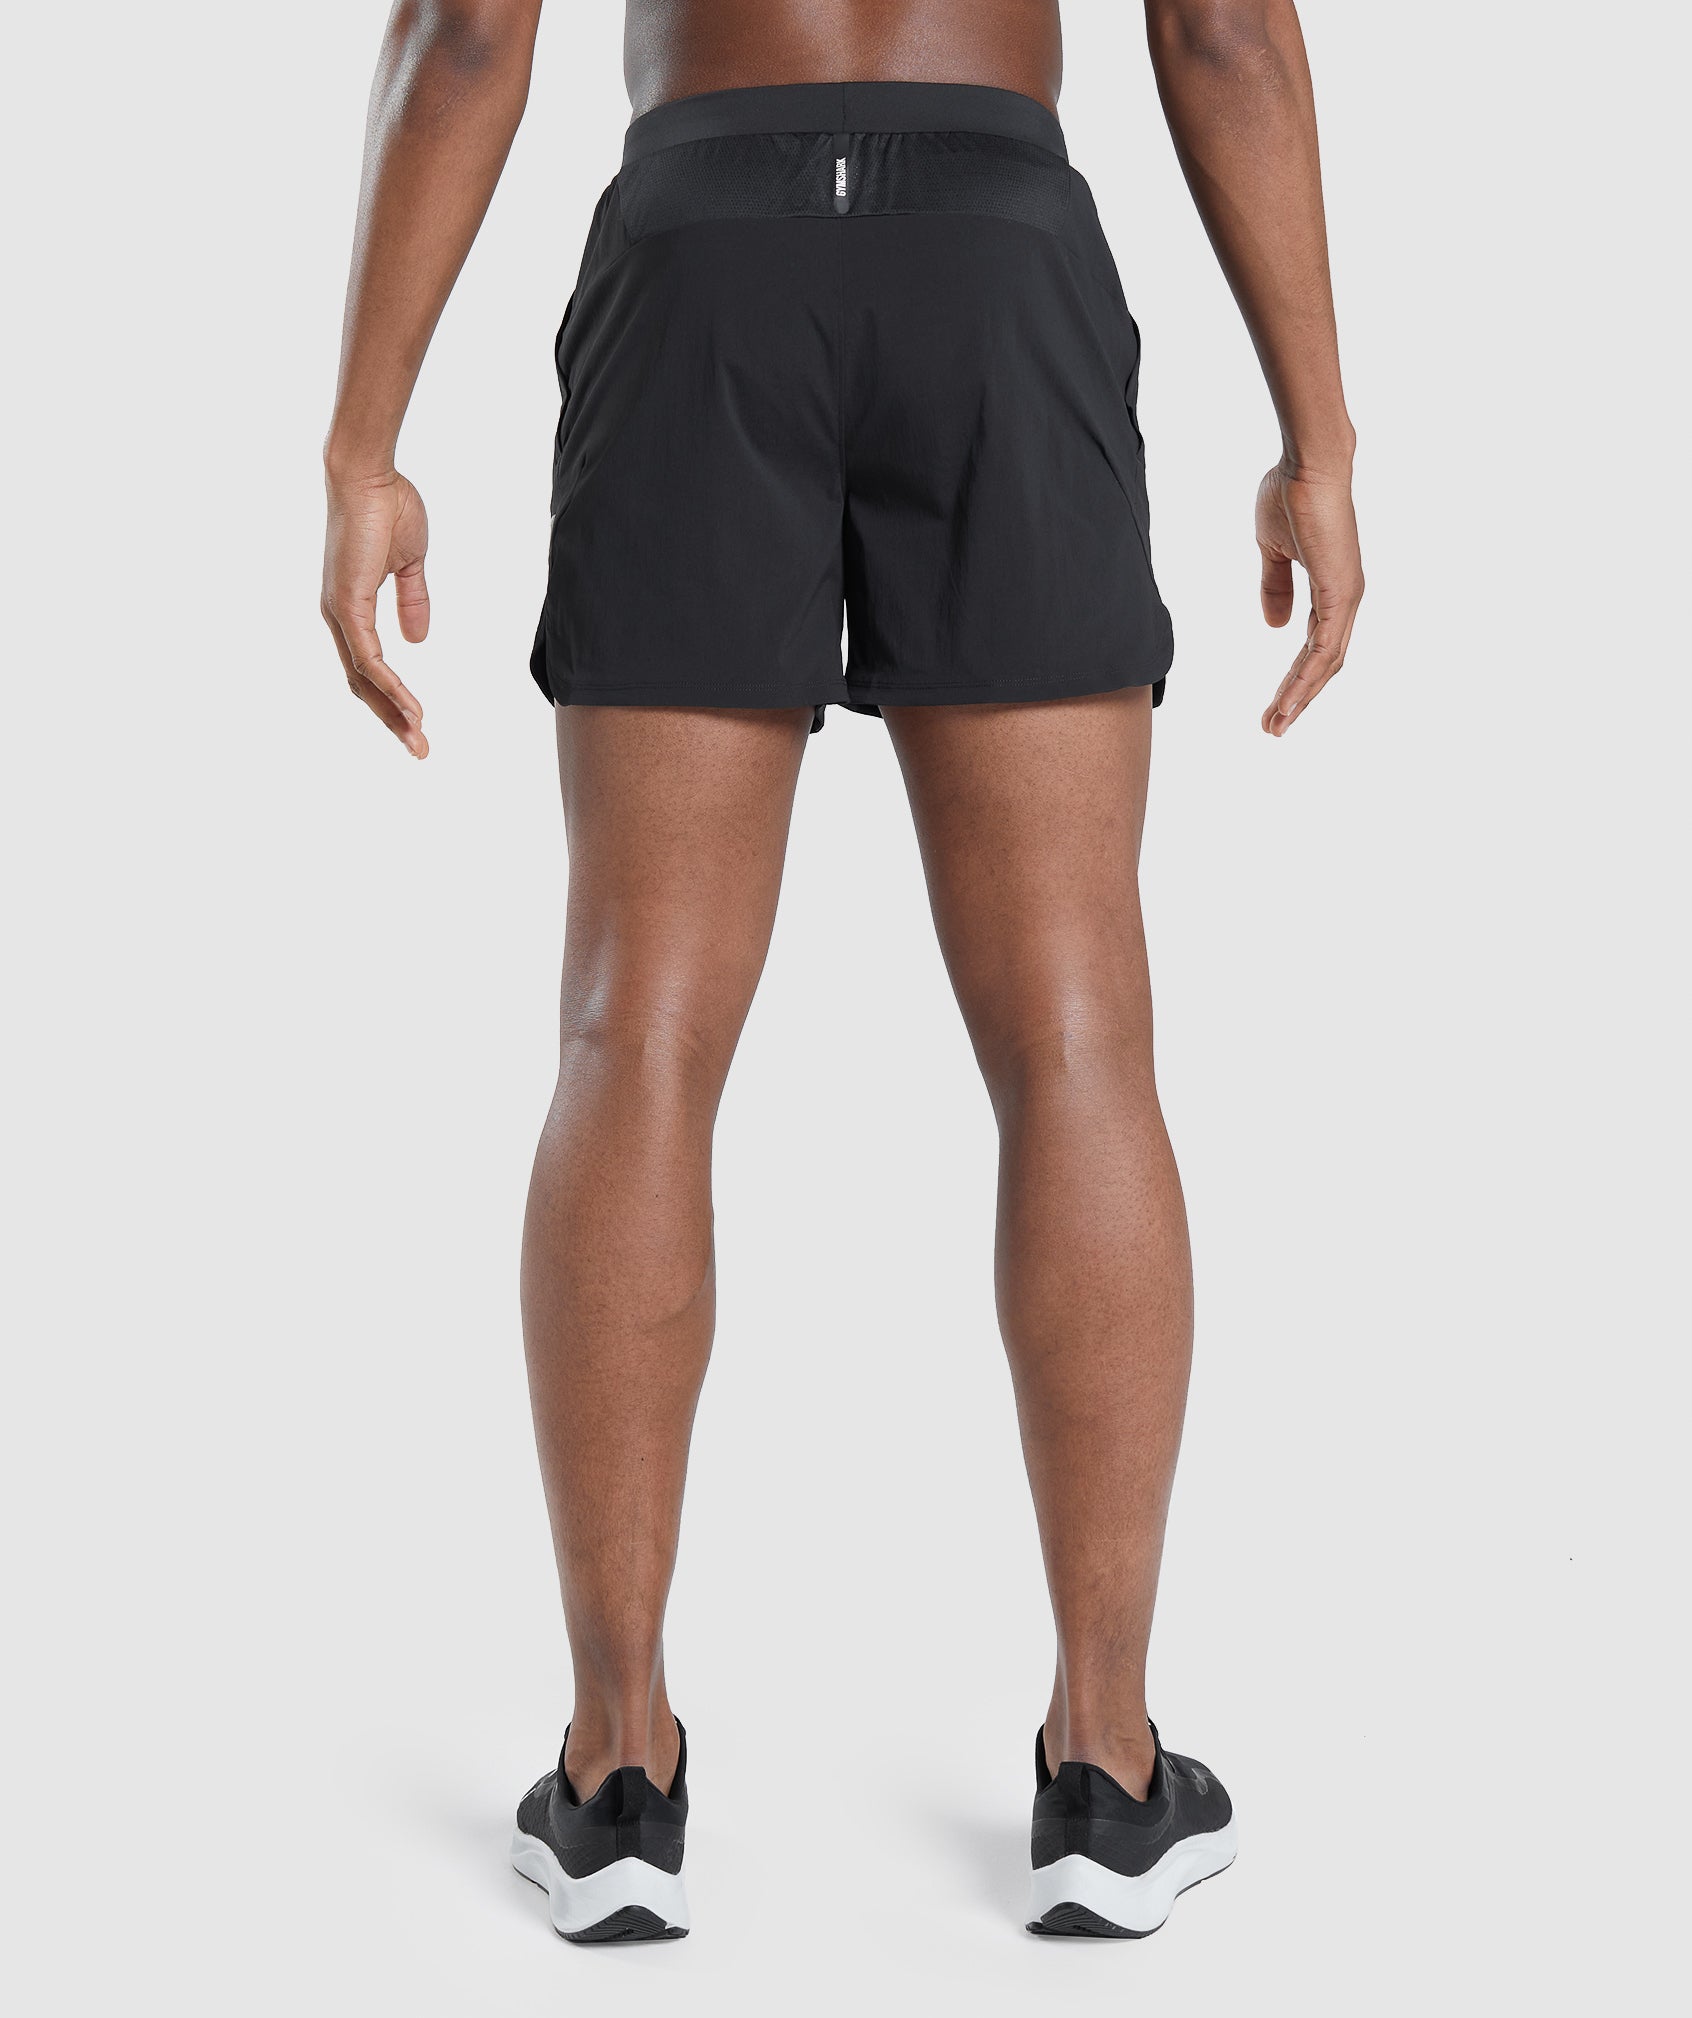 Speed Evolve 5" Shorts in Black - view 3